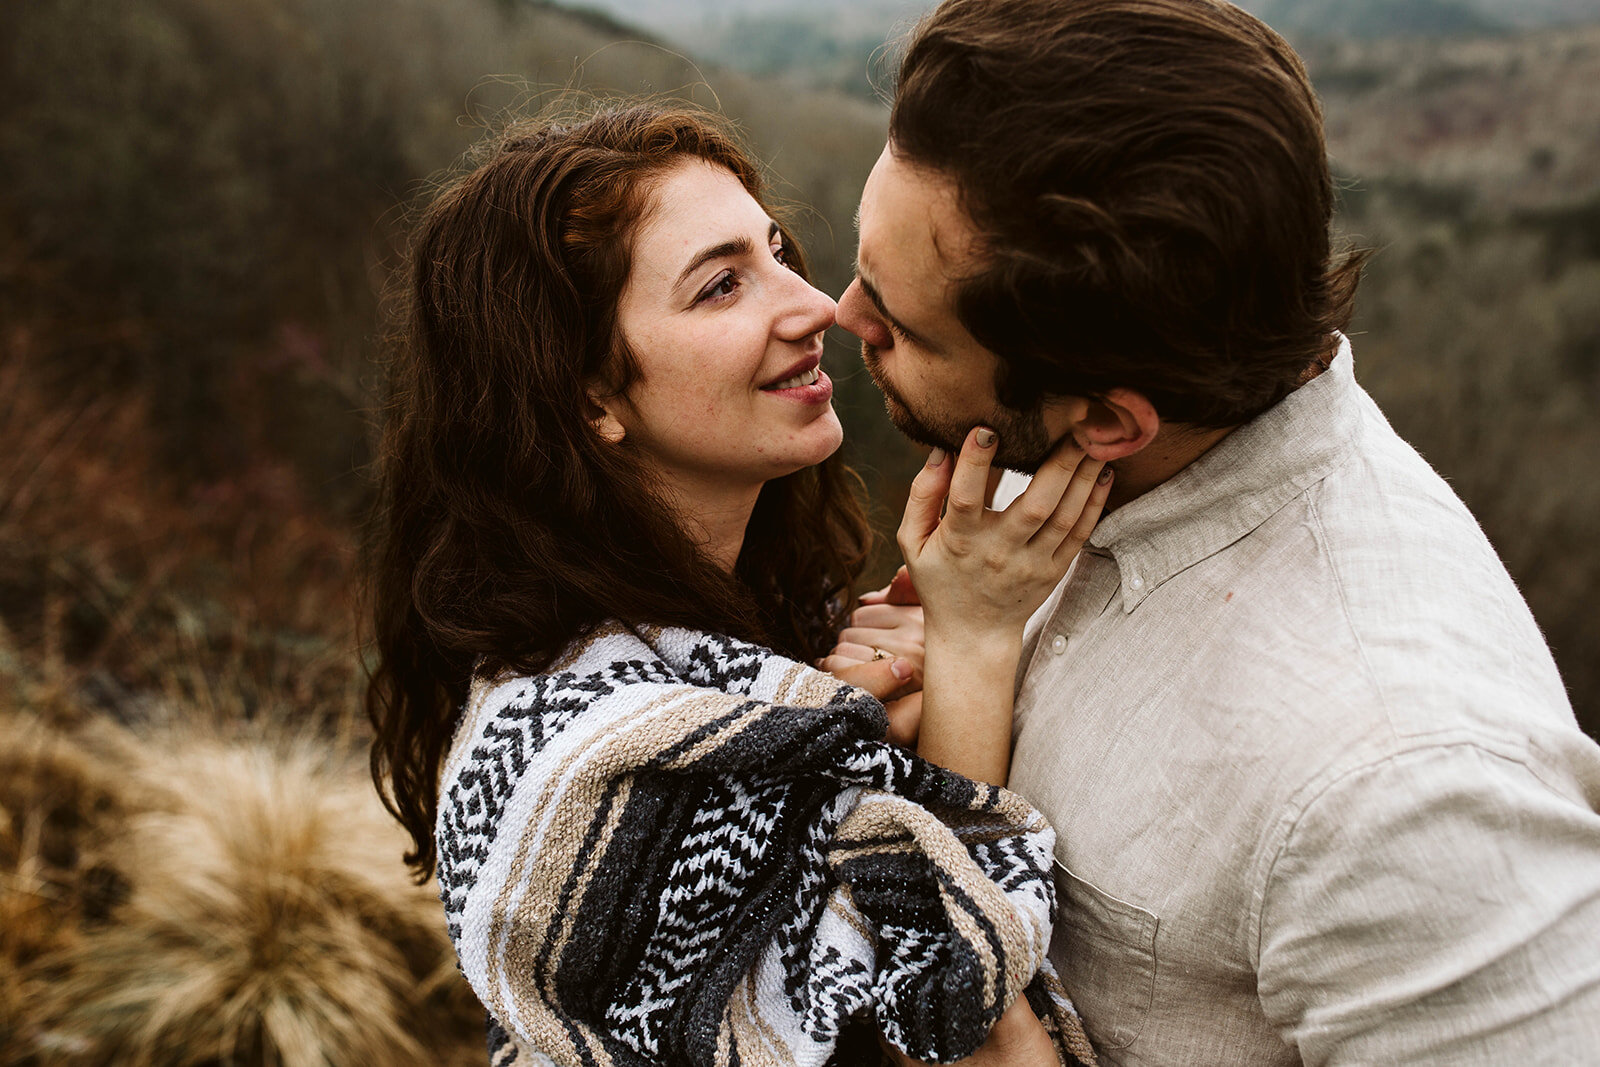 adventure-engagement-in-the-great-smoky-mountains-chattanooga-elopement-photographer5Y6A5781_websize.jpg